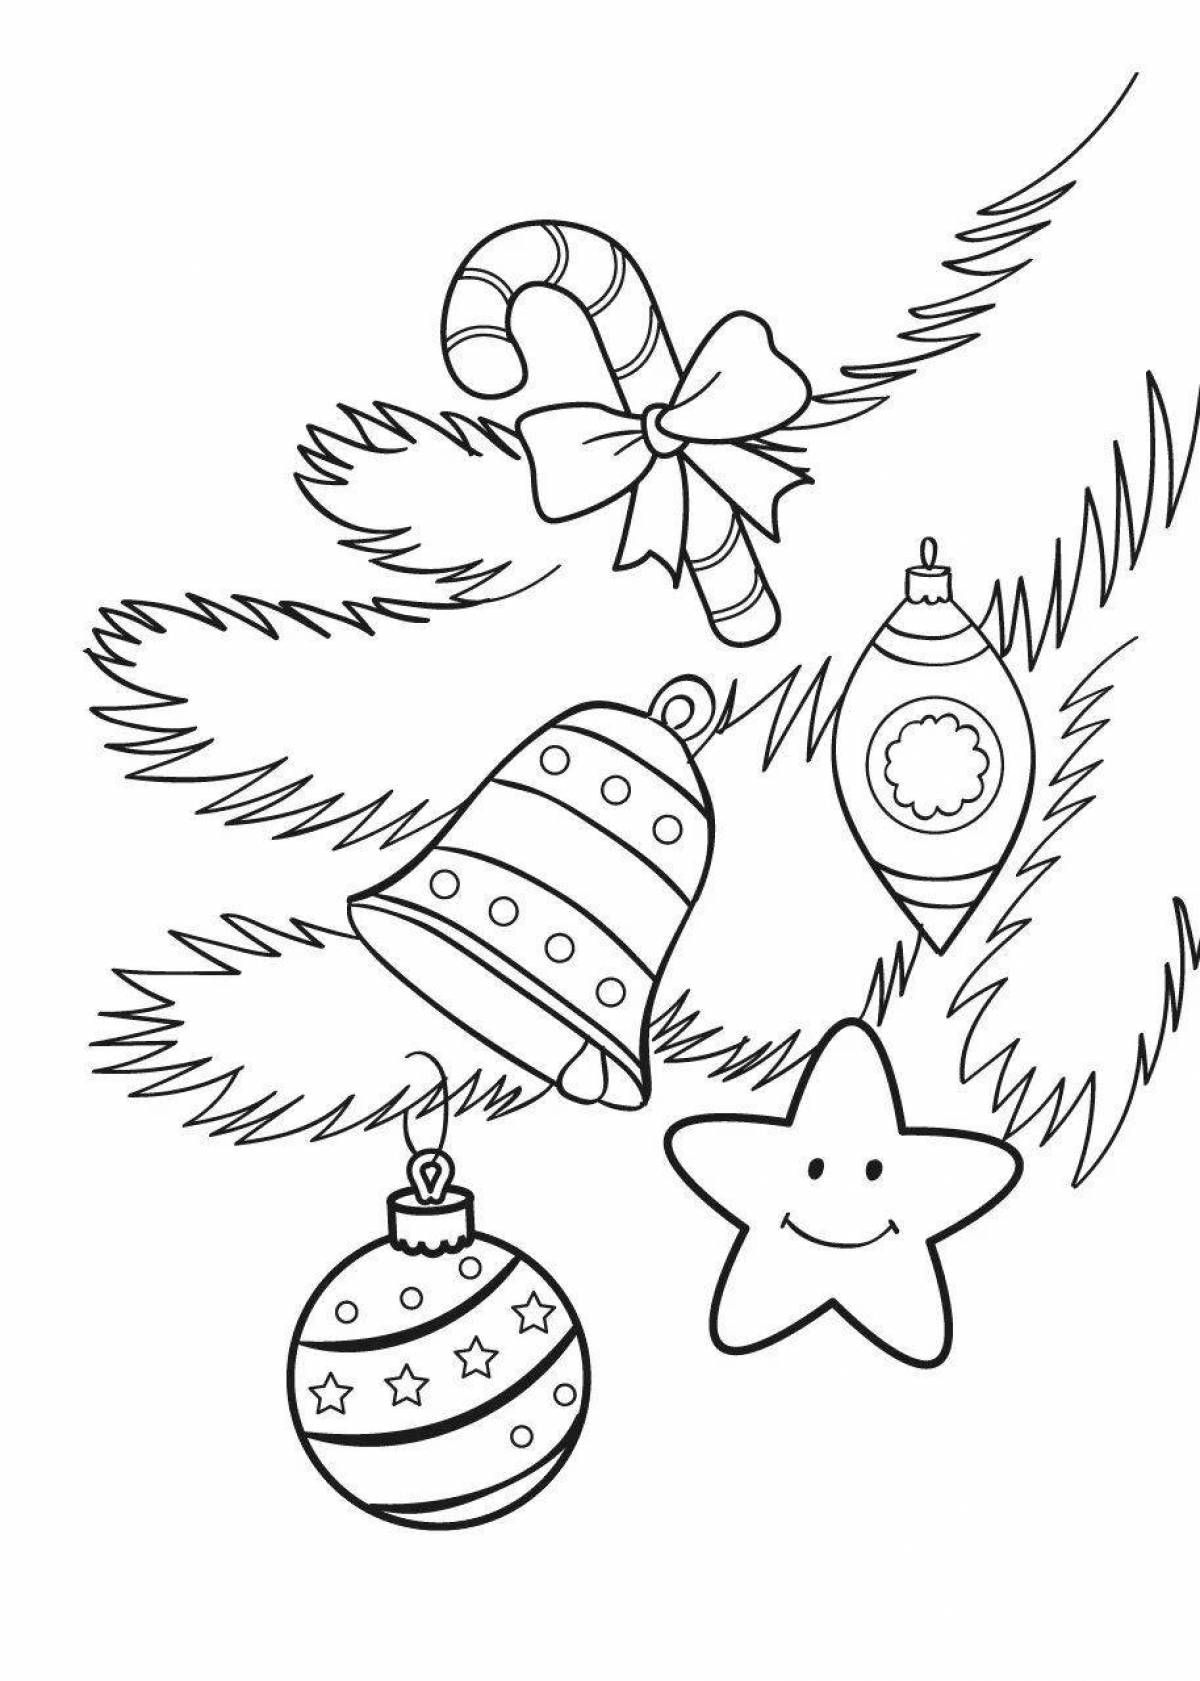 Gorgeous Christmas tree branch coloring book